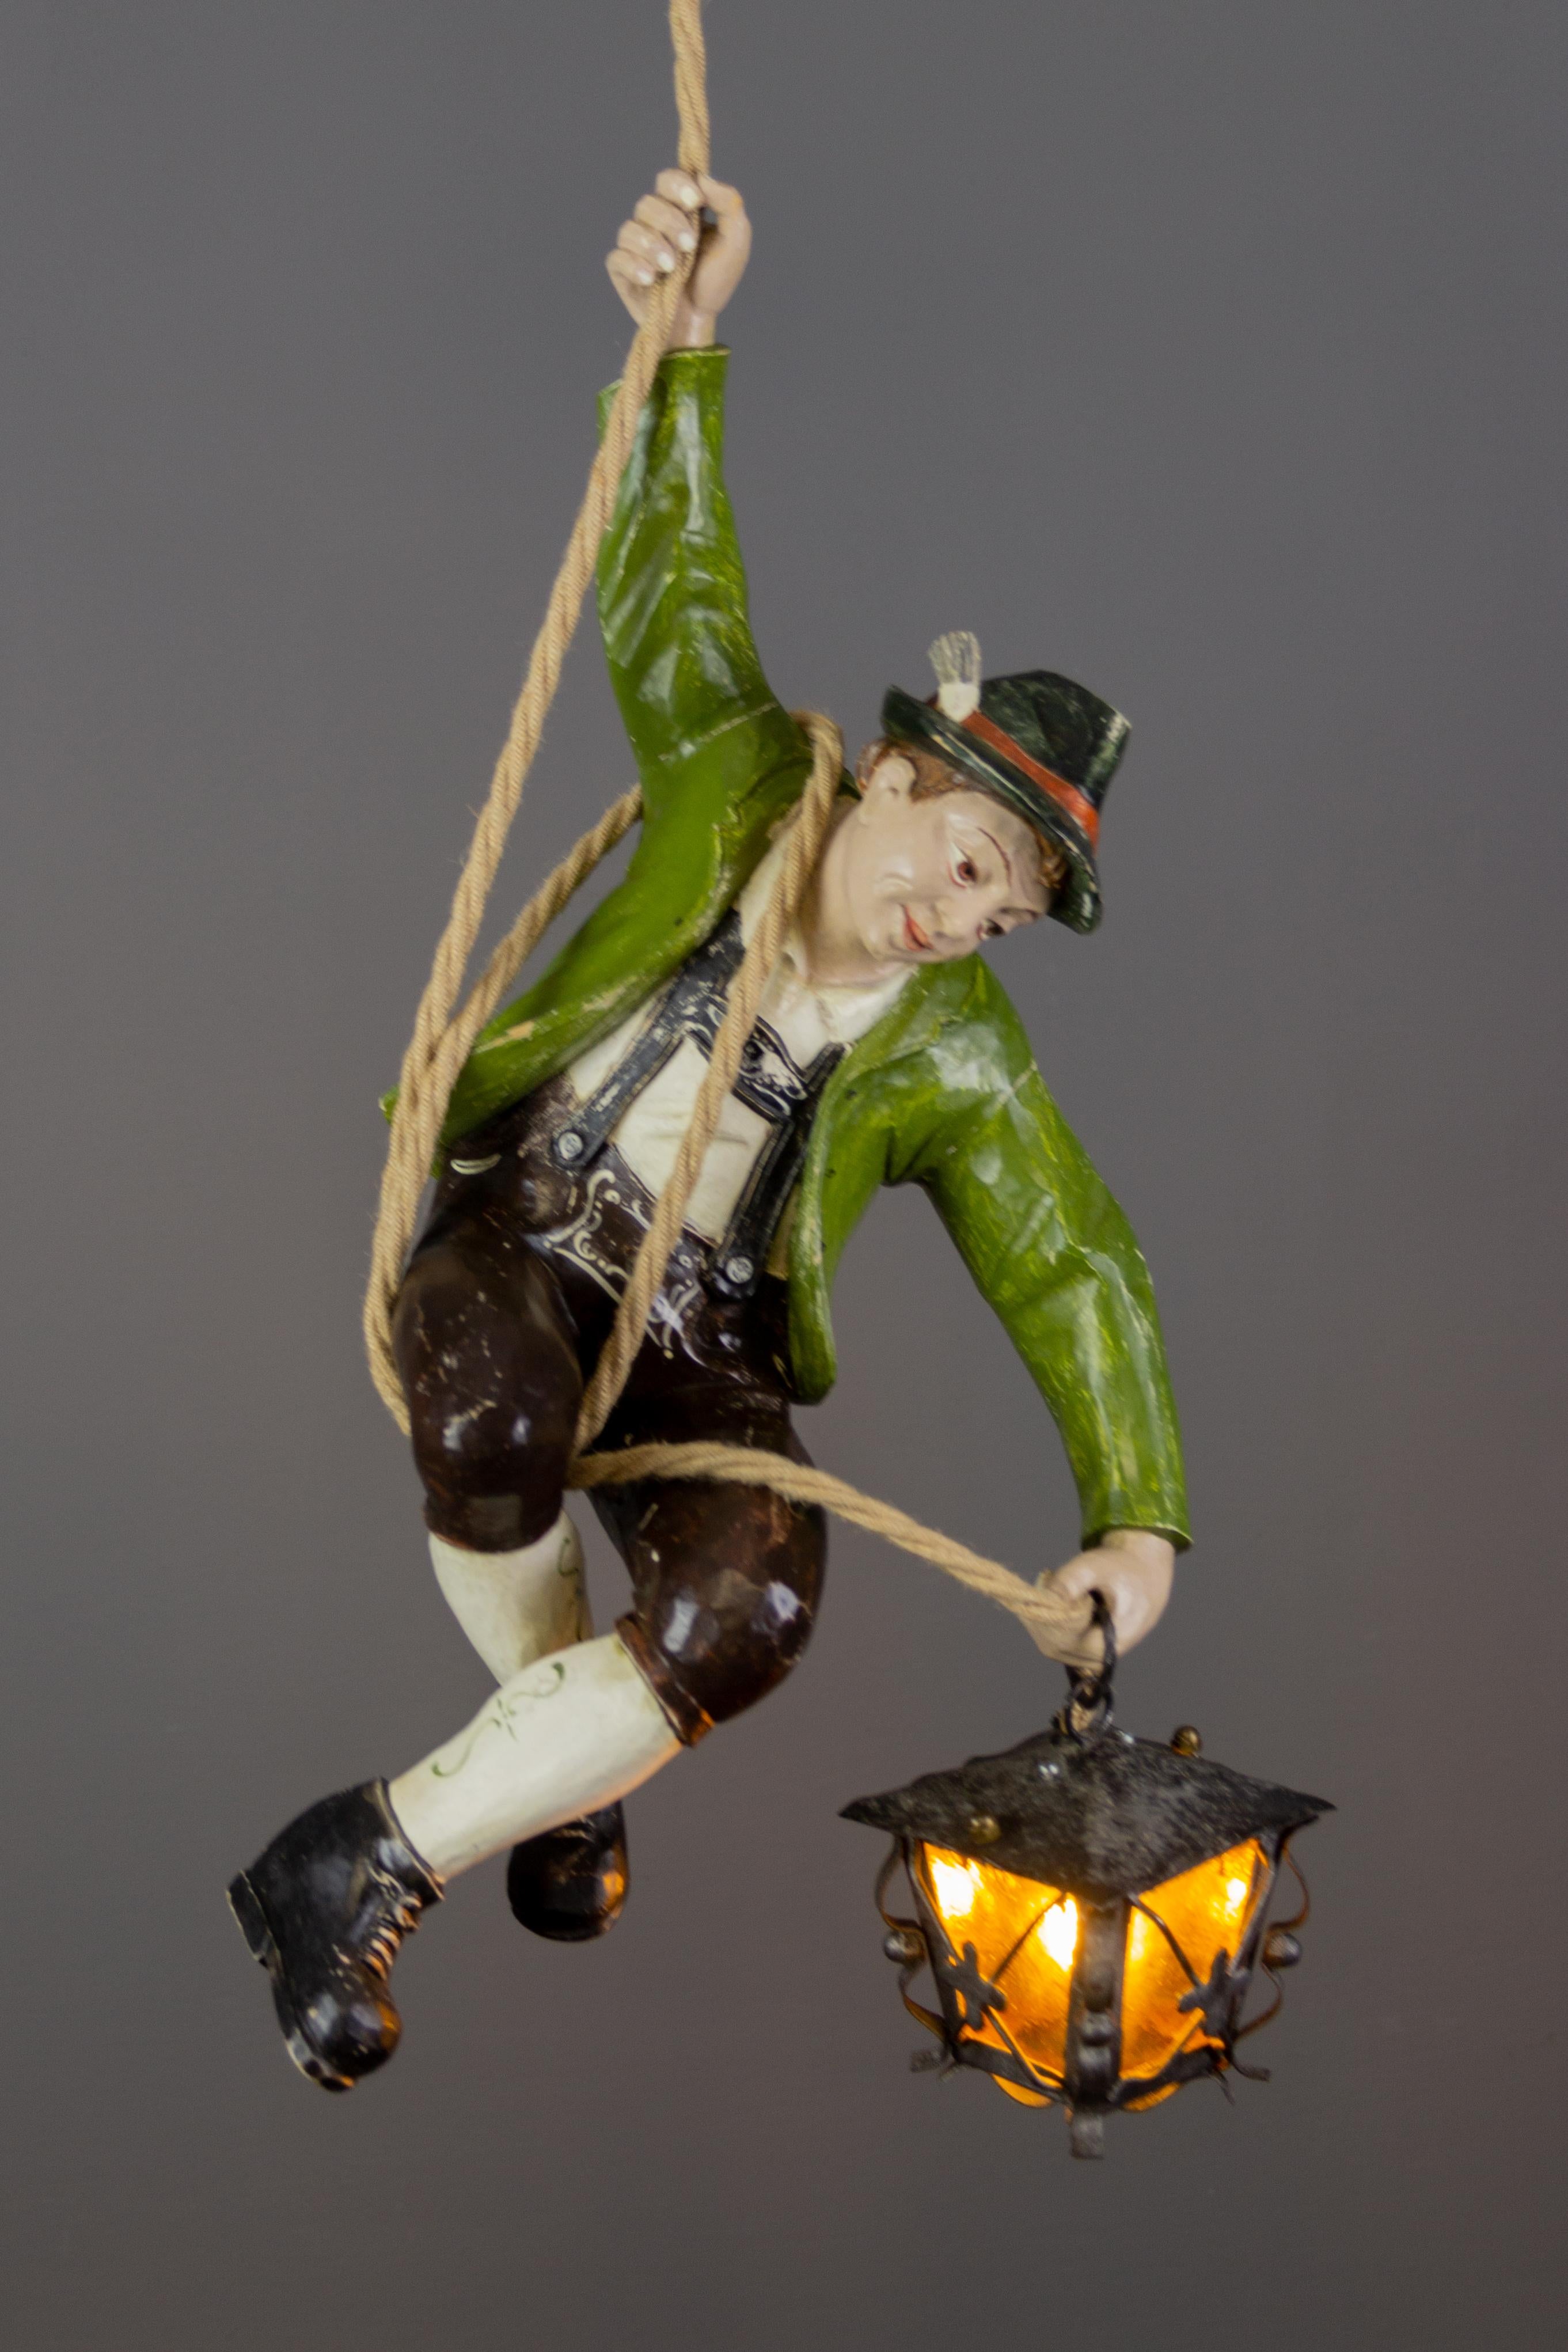 German Pendant Light with Carved Wooden Mountain Climber Figure and Lantern For Sale 2